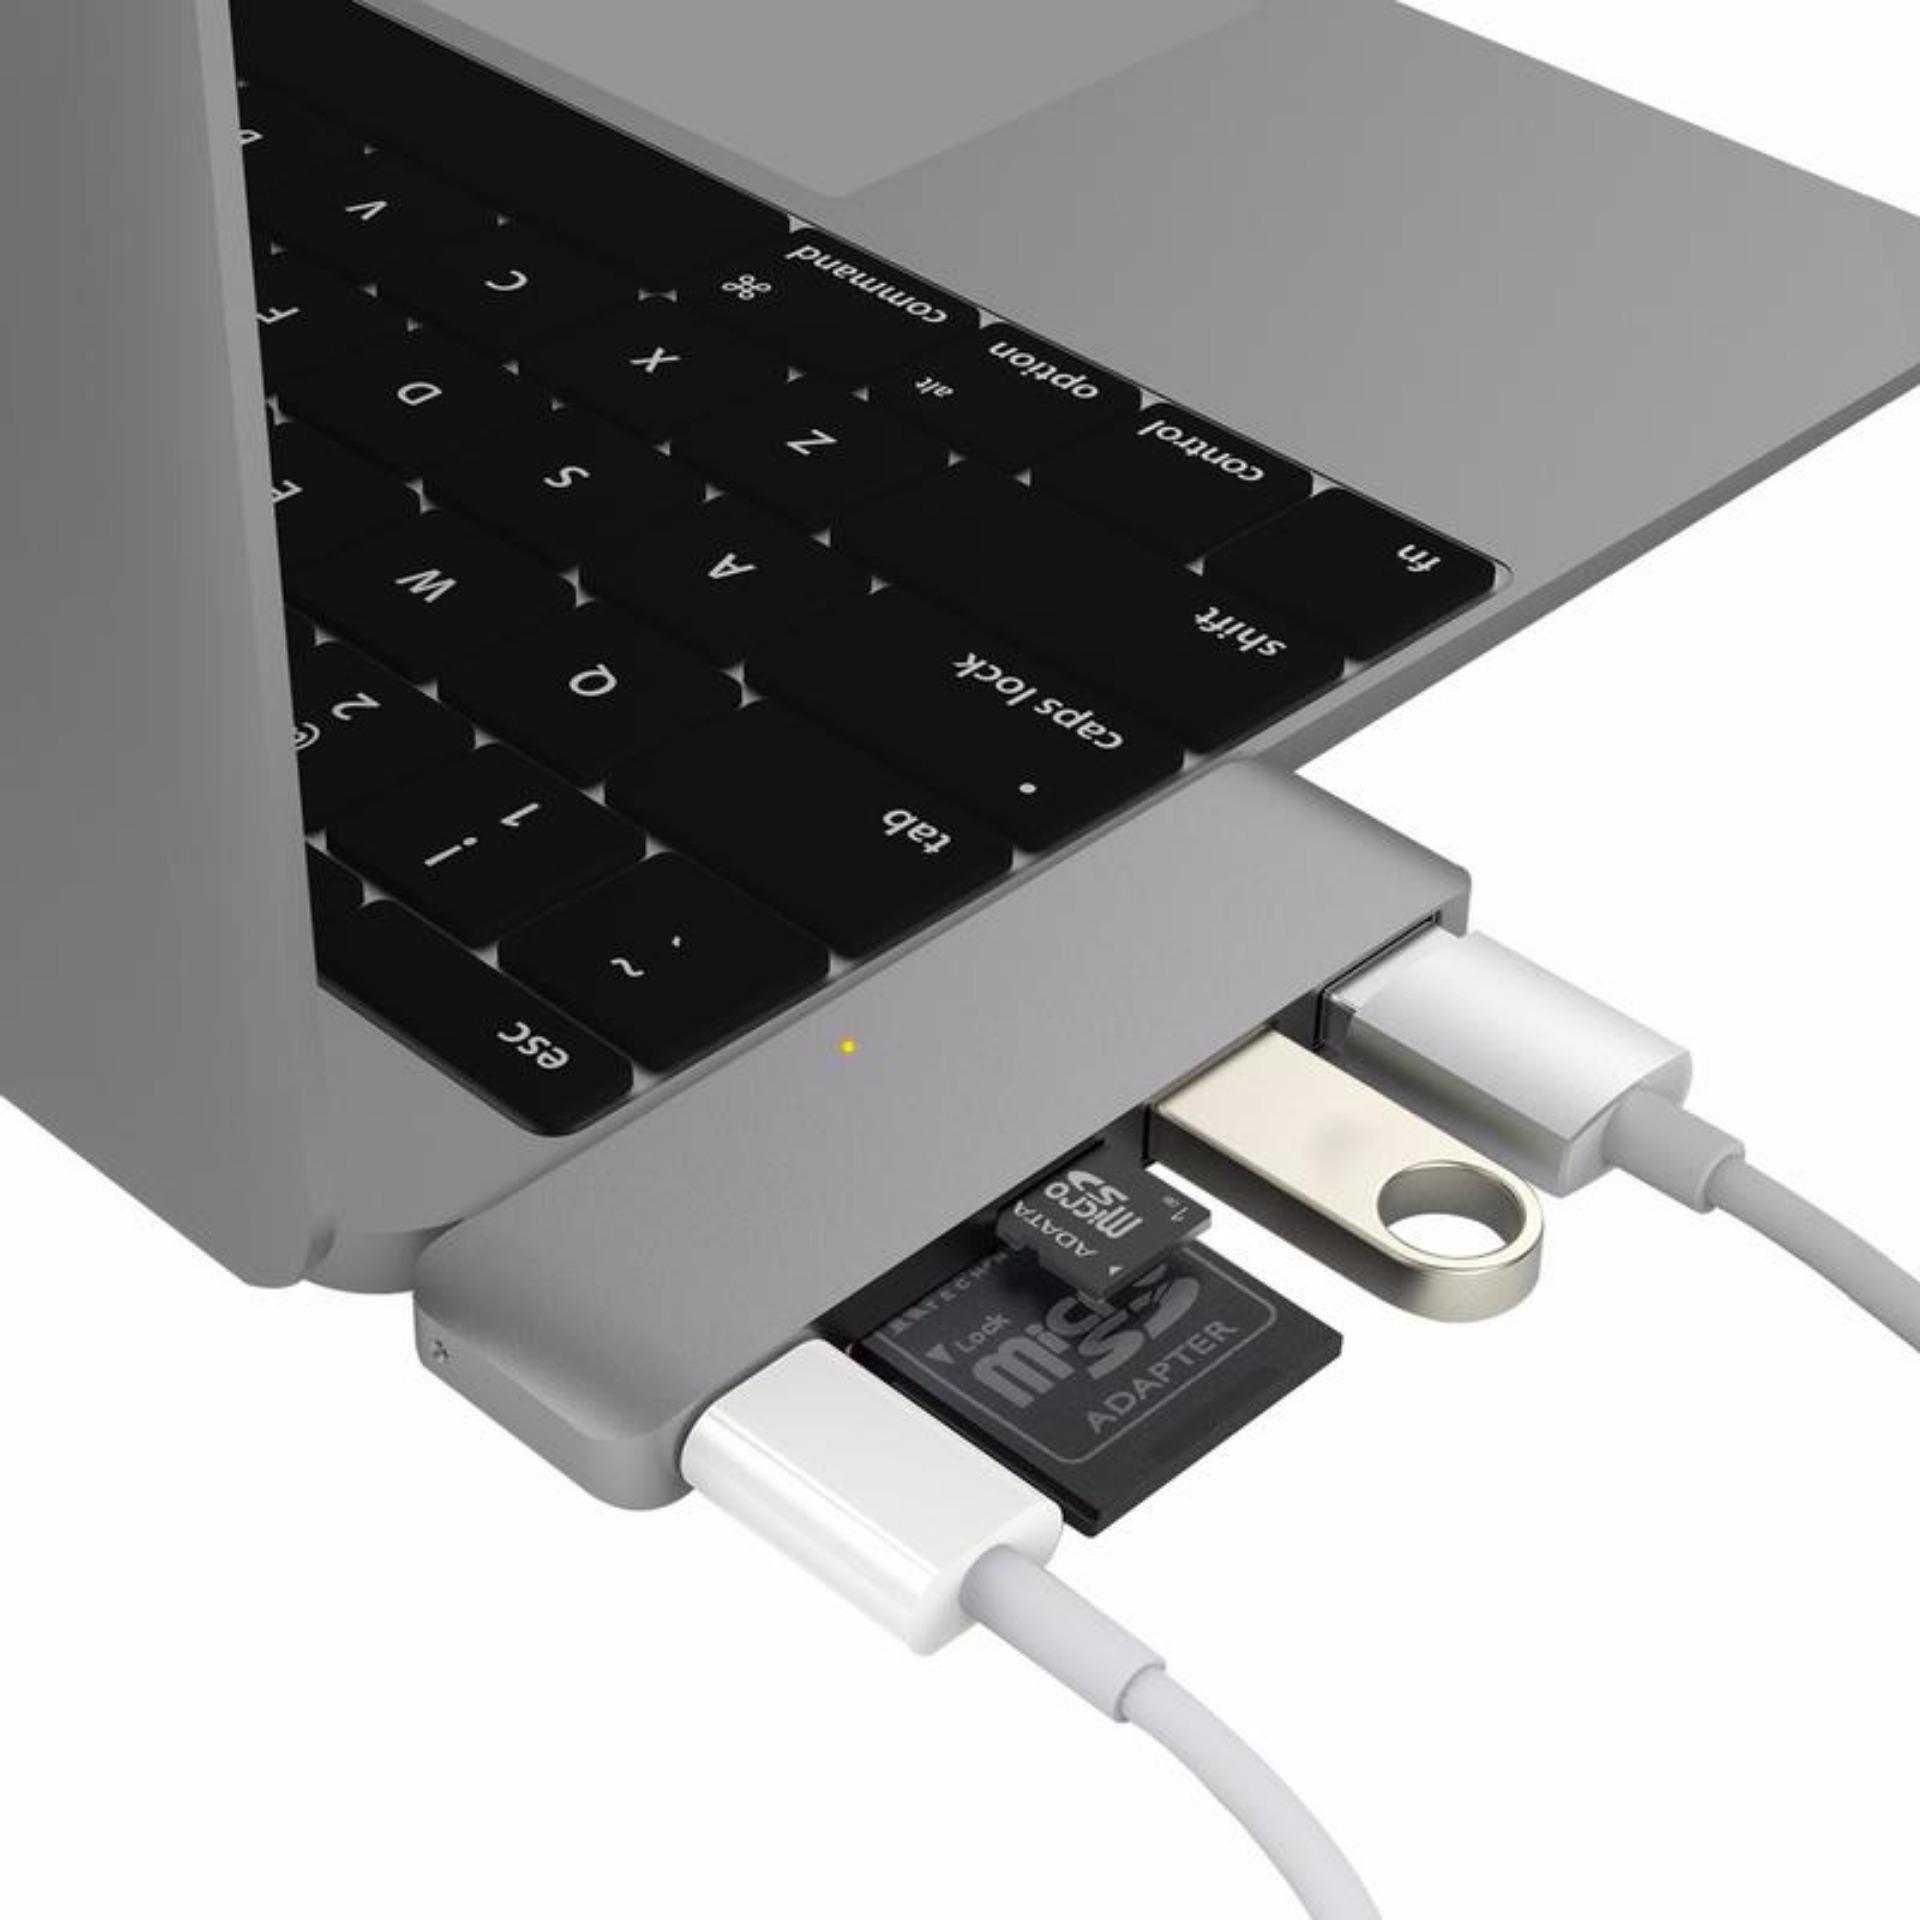 HyperDrive USB Type-C 5-in-1 Hub with Pass Through Charging Space Gray